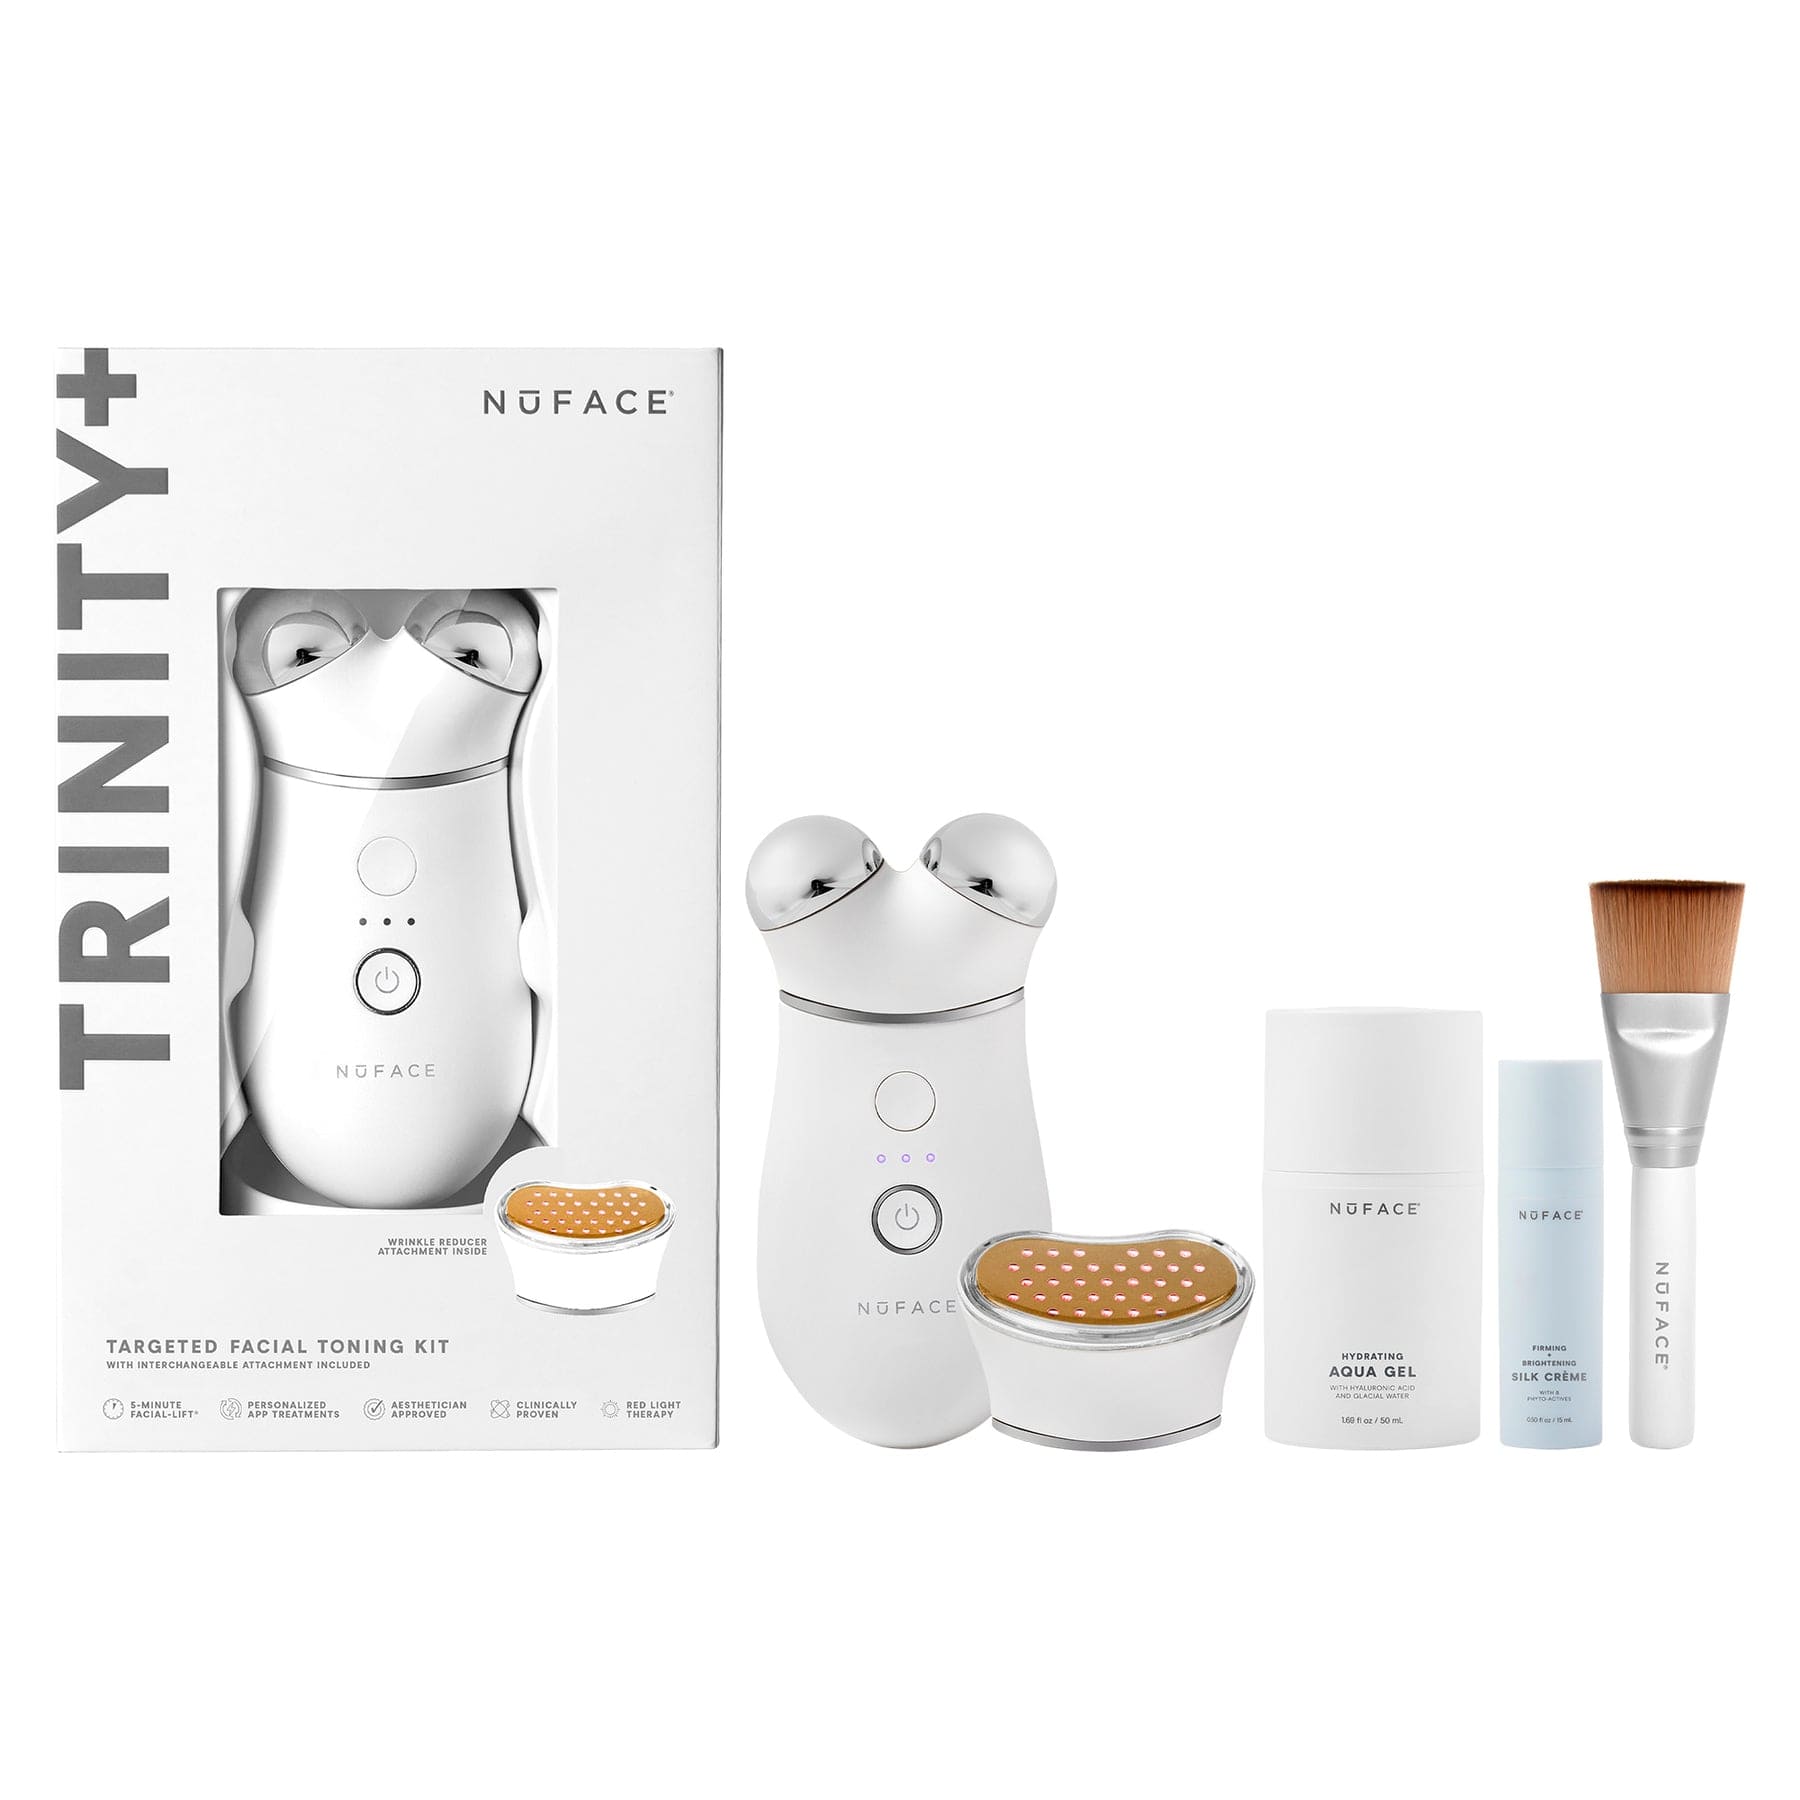 TRINITY+ and Wrinkle Reducer Attachment - Smart Advanced Facial Toning Device with LED Red Light Attachment